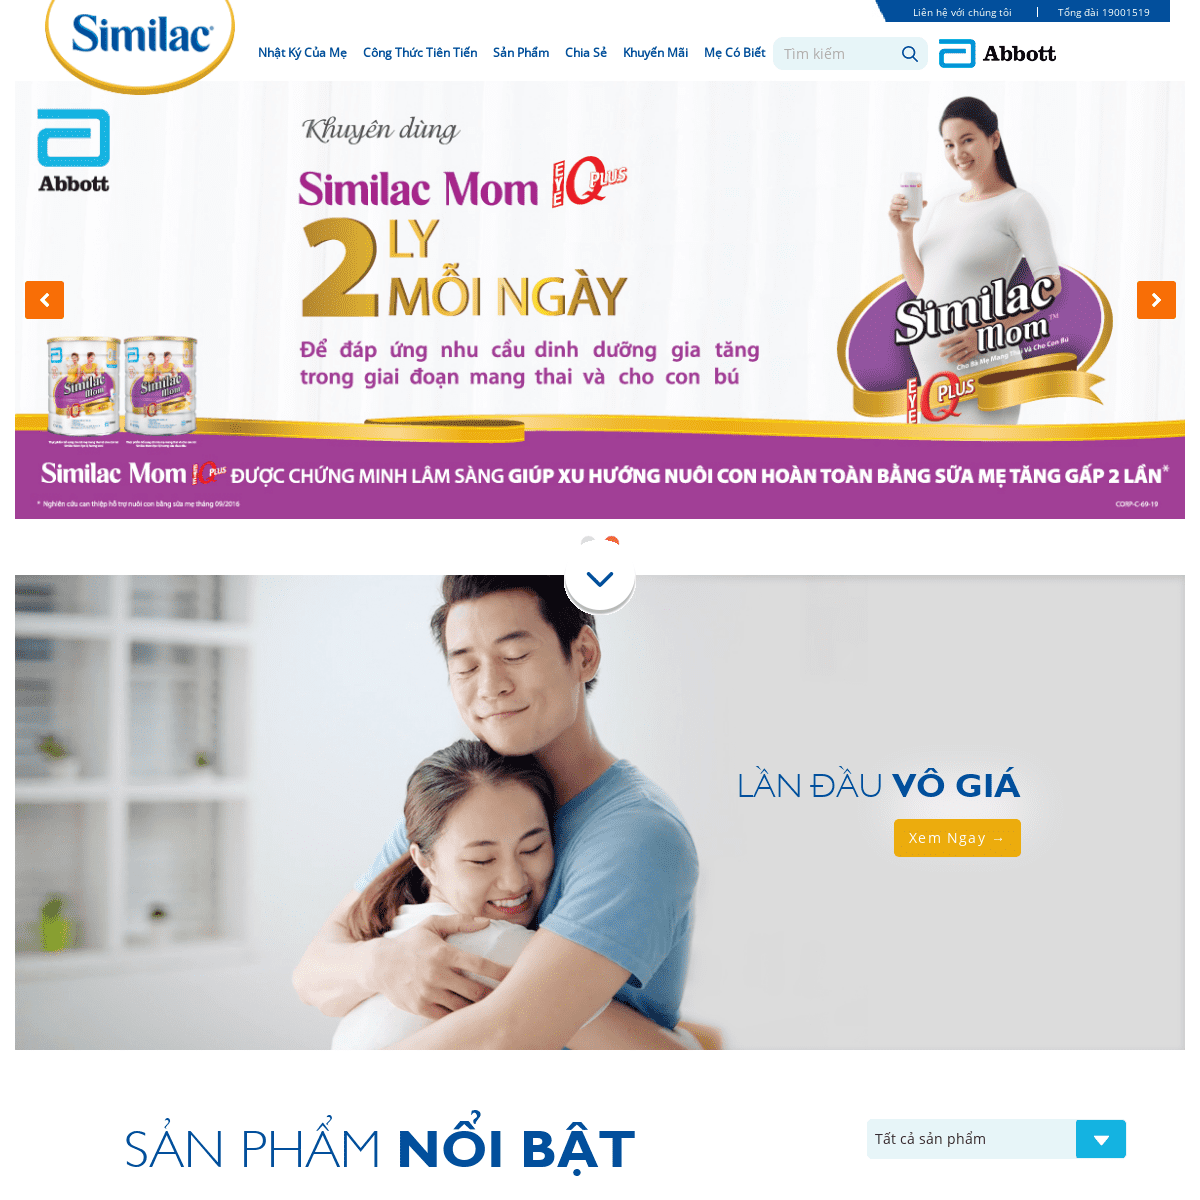 A complete backup of similac.com.vn